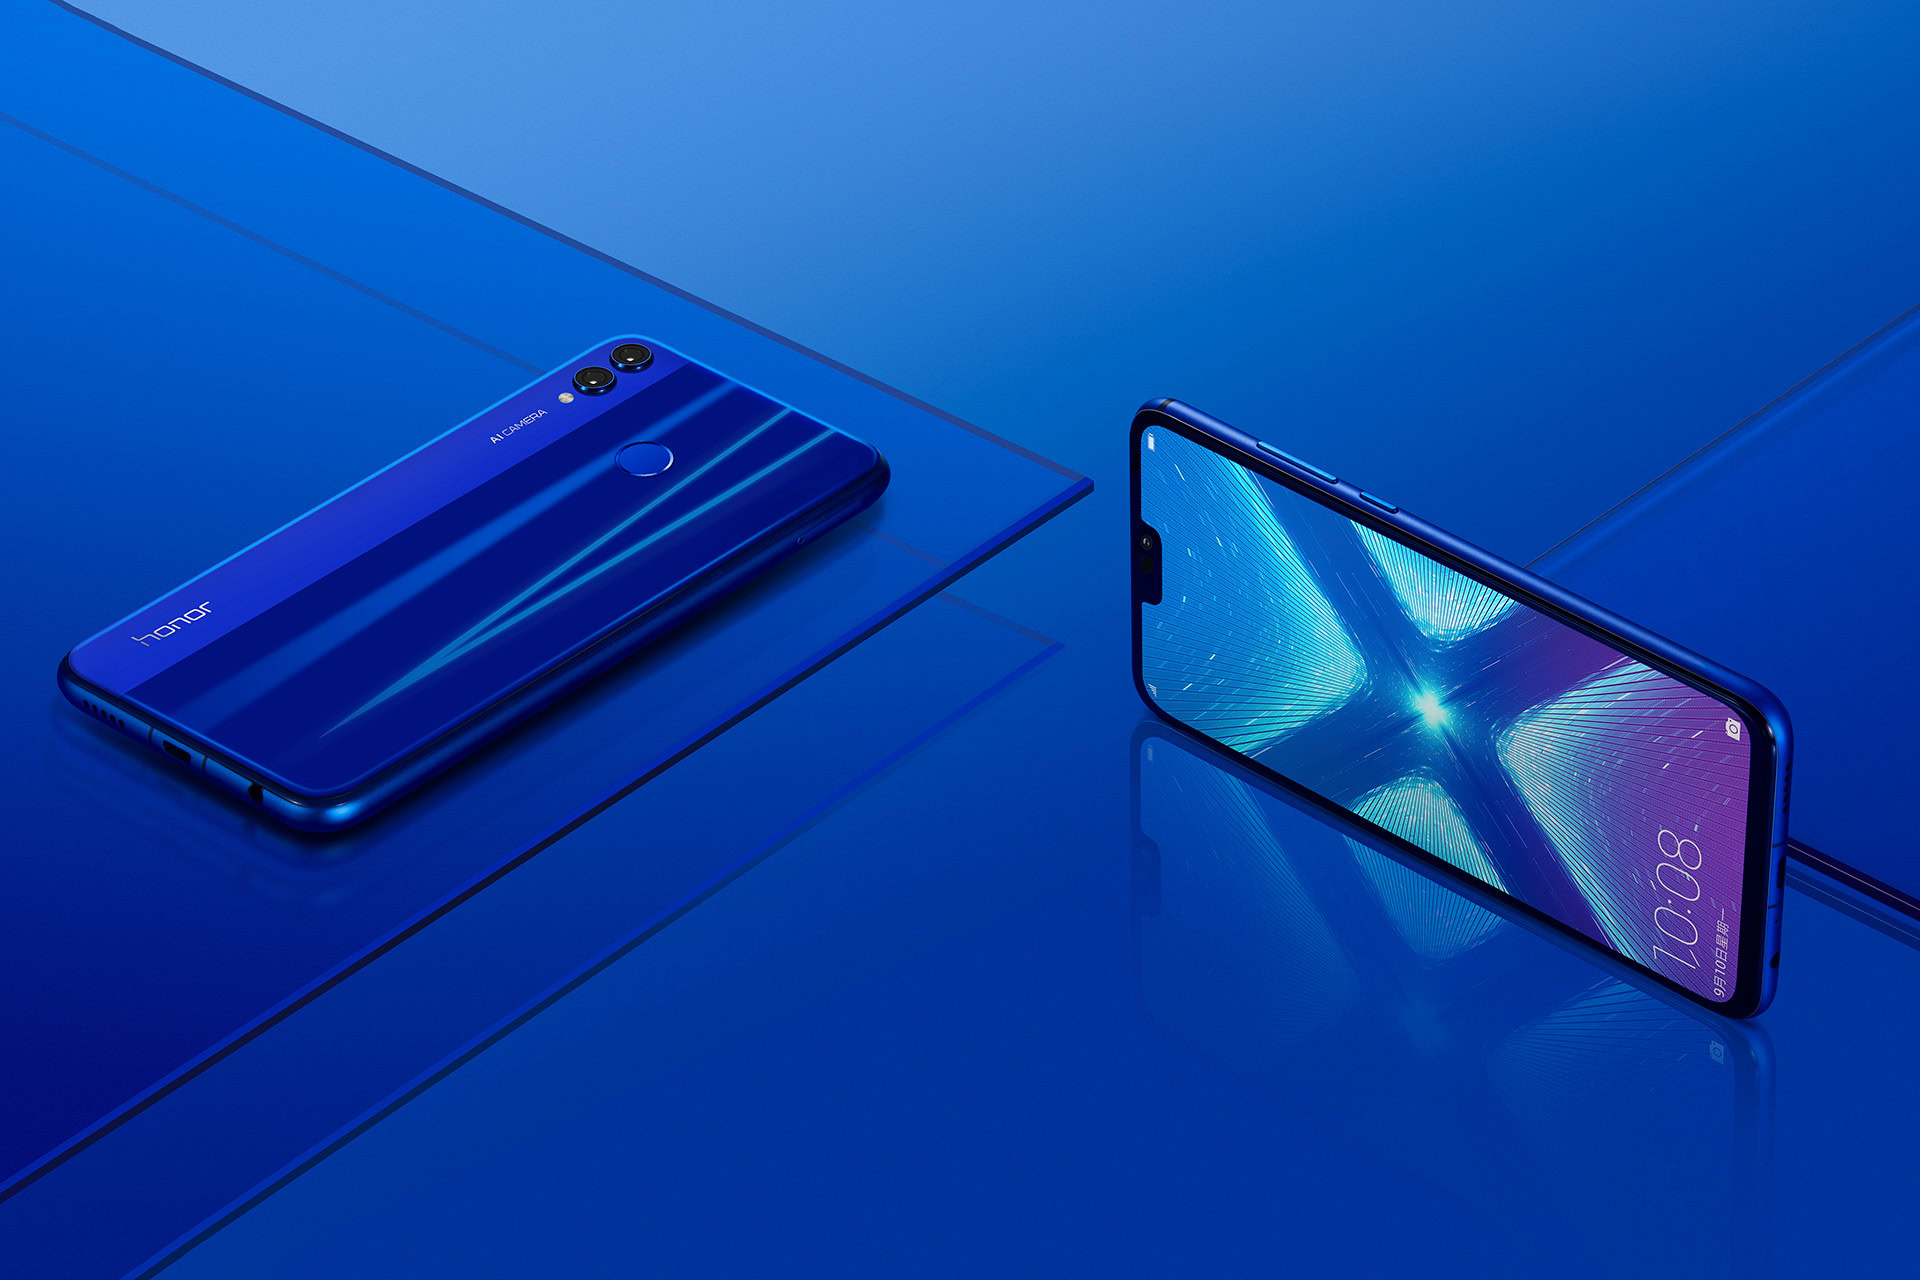 An image of the ront and back of the HONOR 8X.